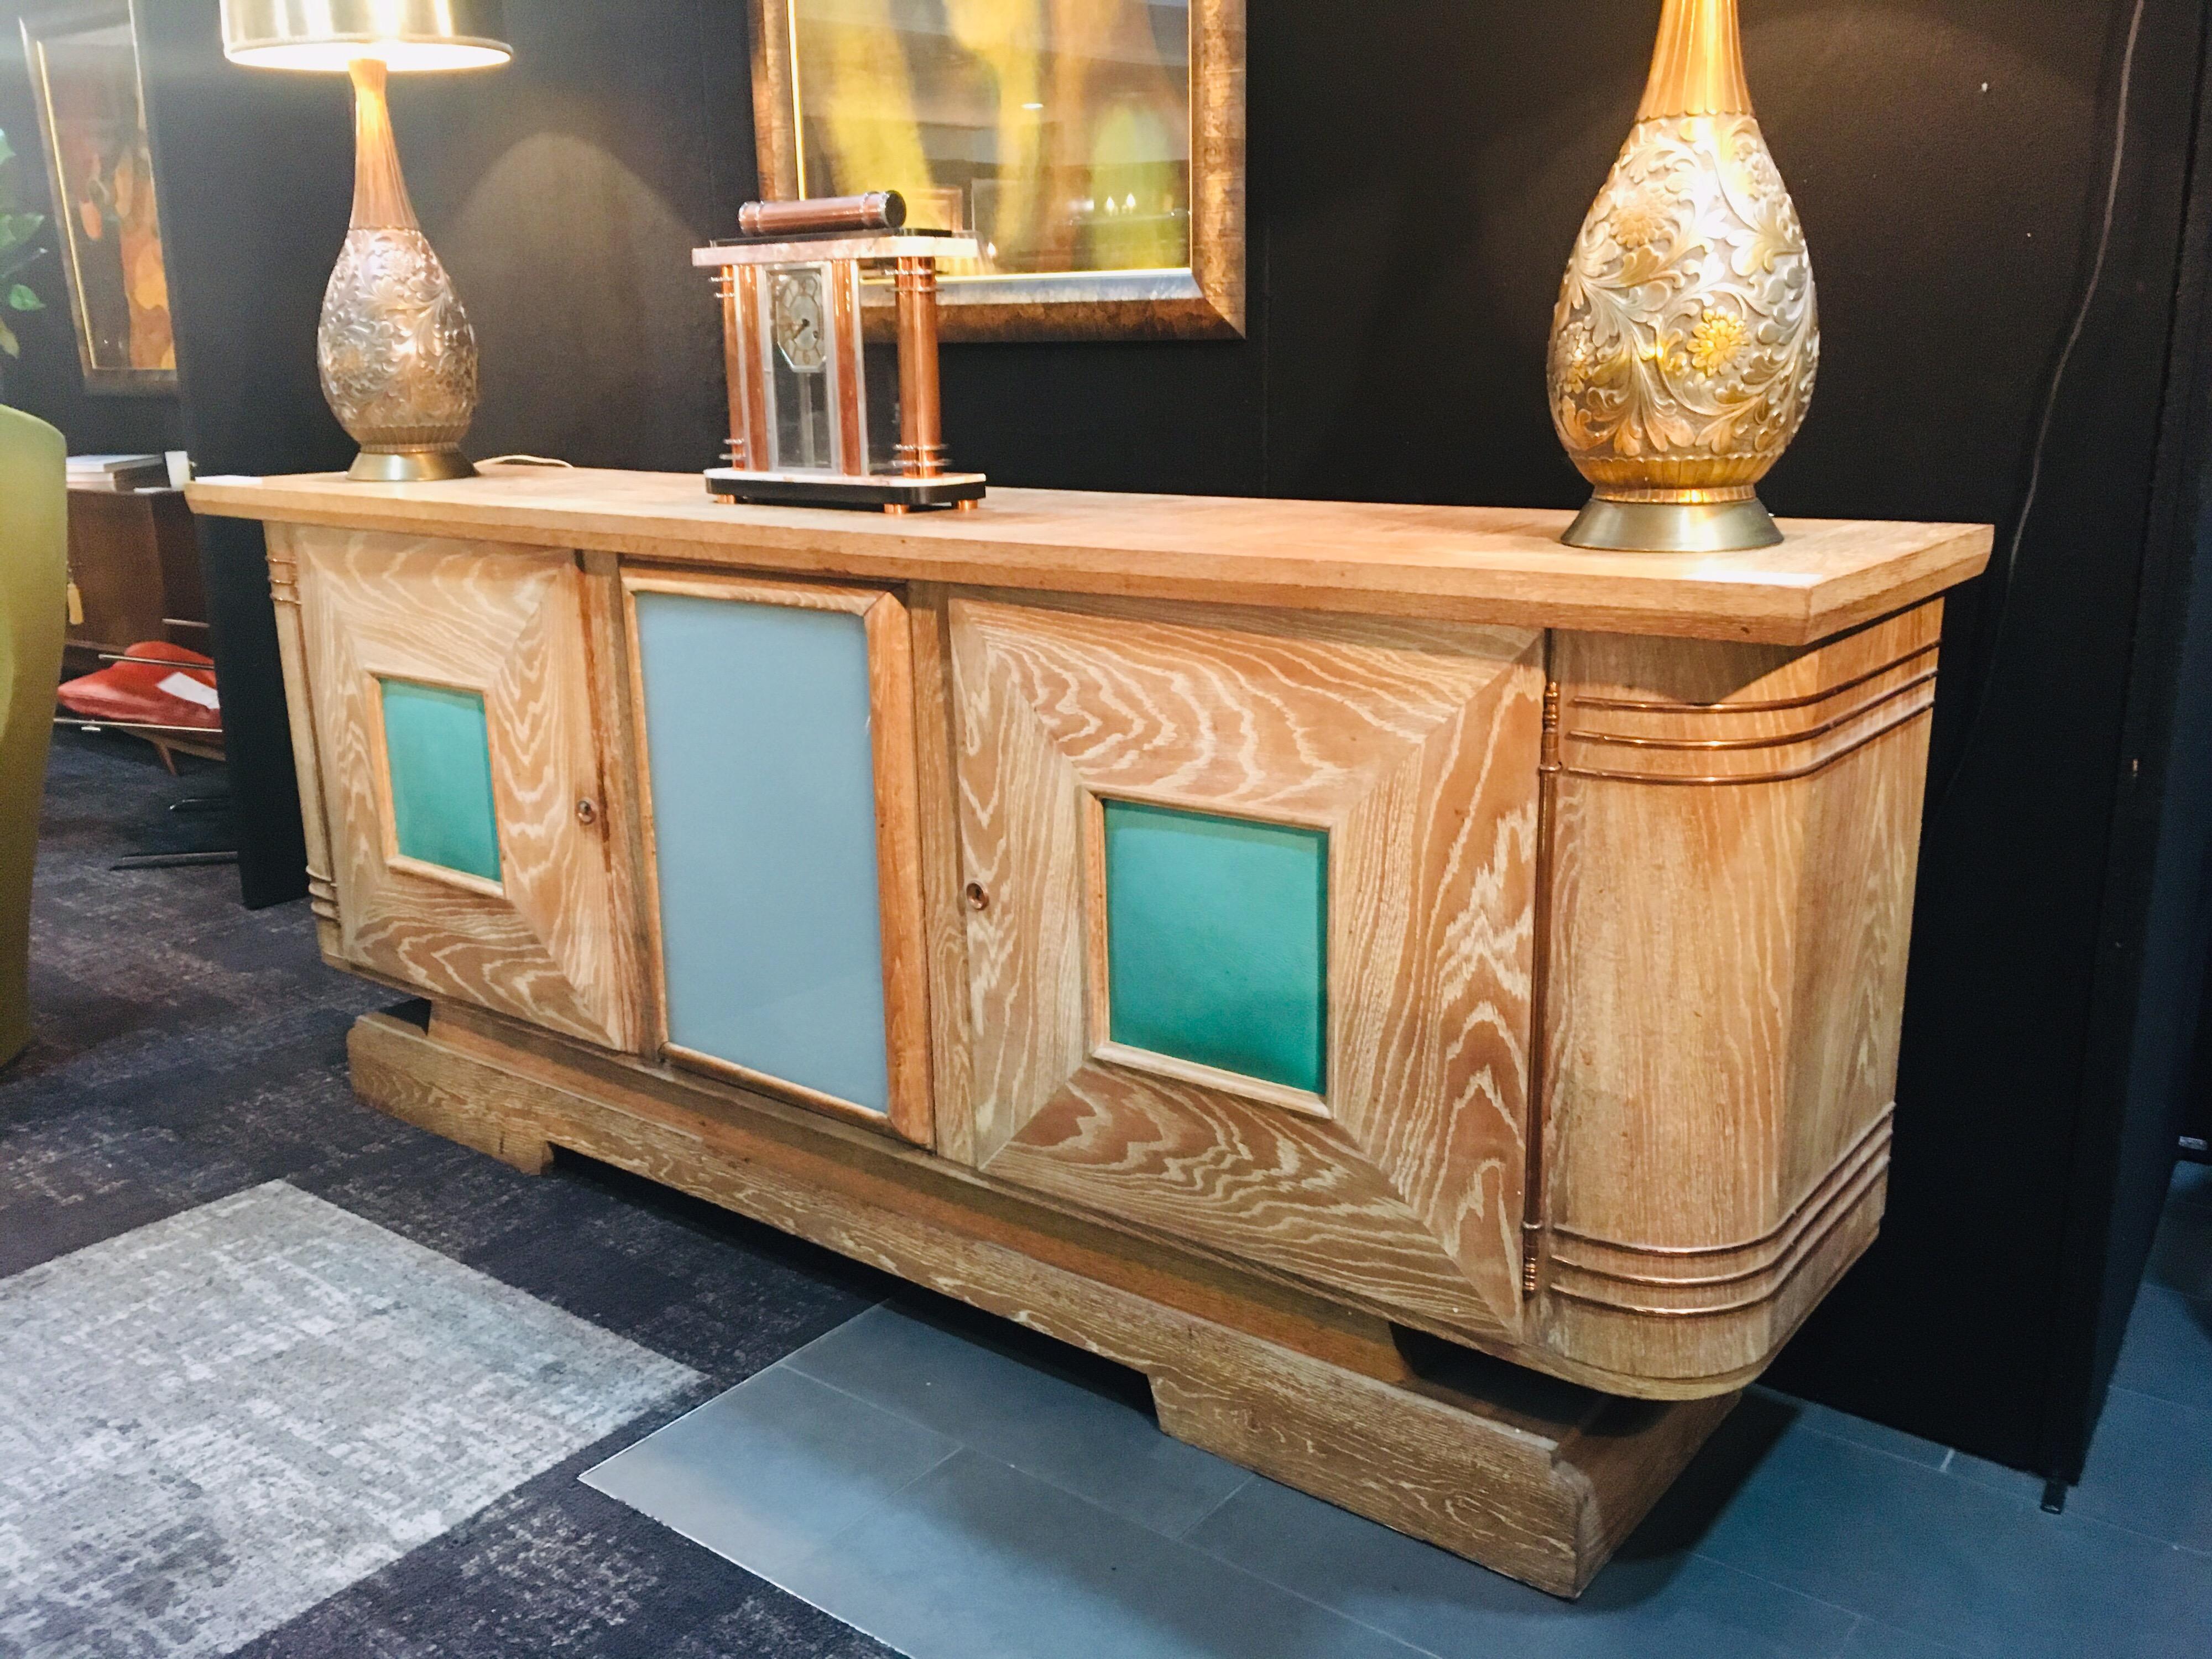 French Art Deco Jean-Charles Moreux Cerused Oak Sideboard, France, circa 1940s For Sale